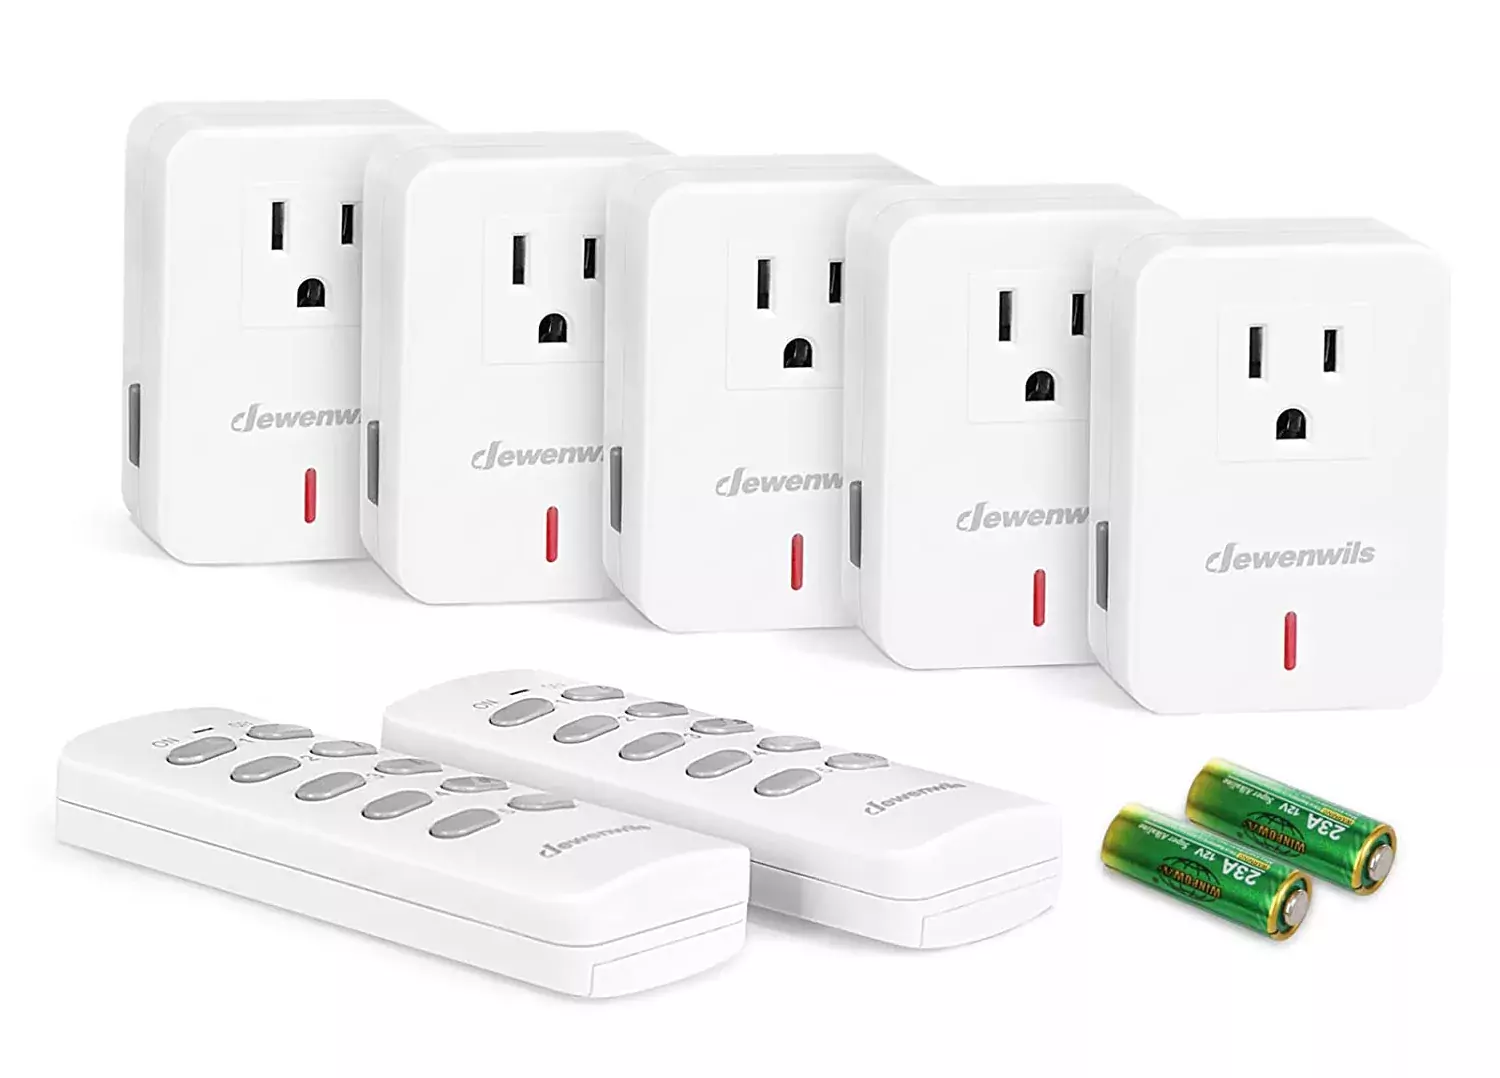 Dewenwils remote control outlet is a simple plug-and-play device